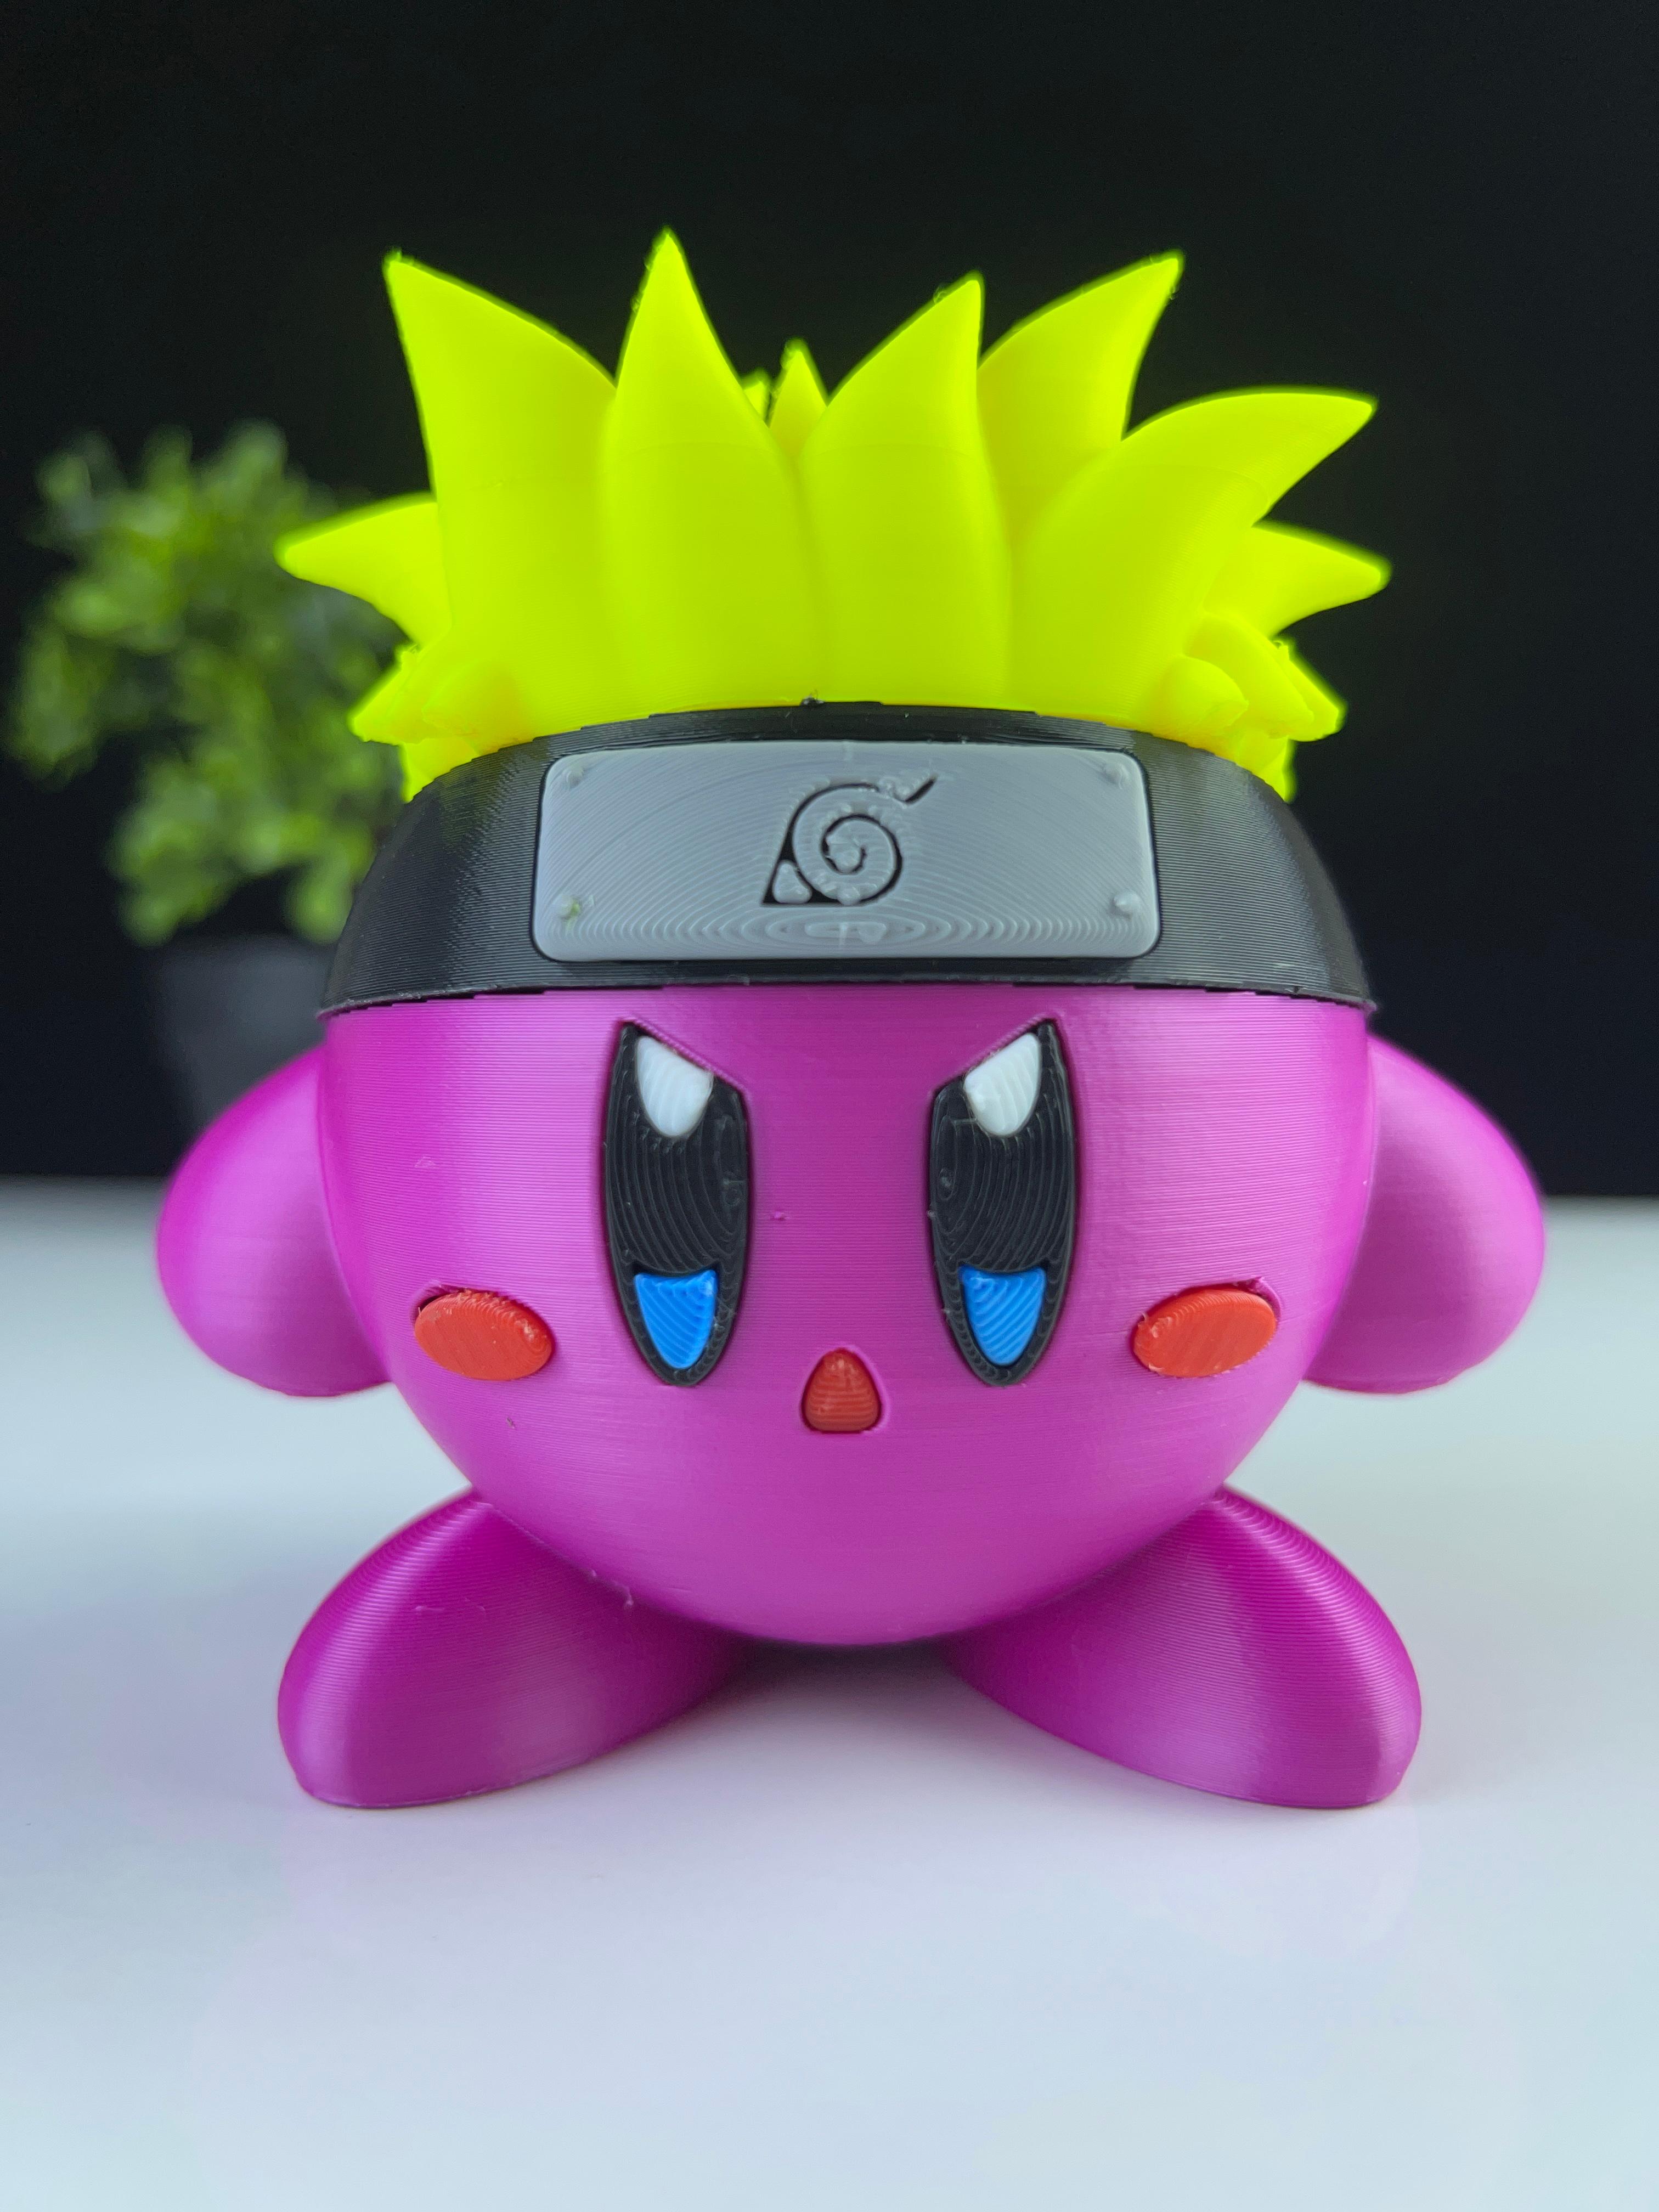 Naruto kirby - Multipart 3d model